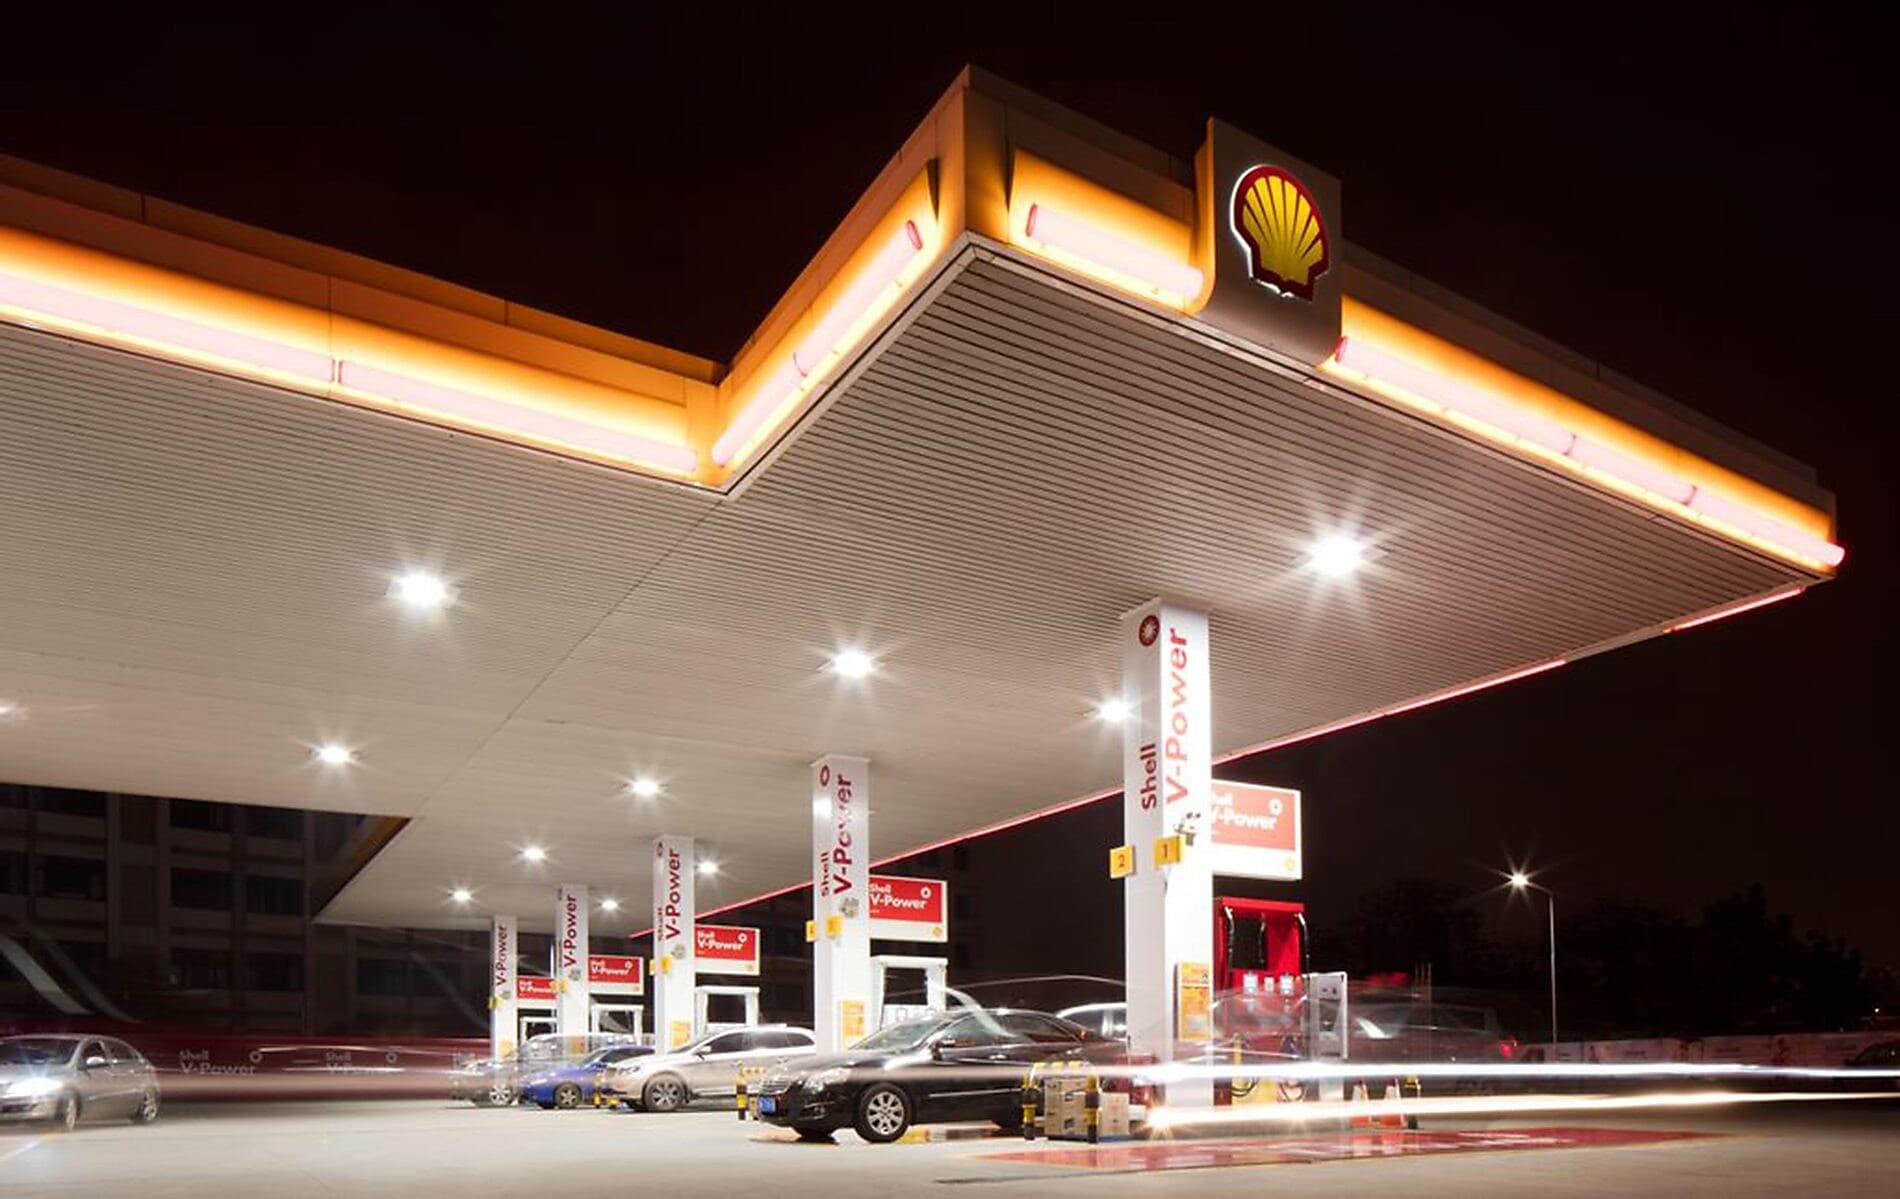 Shell - Helotes (TX 78023), US, gasoline station near me